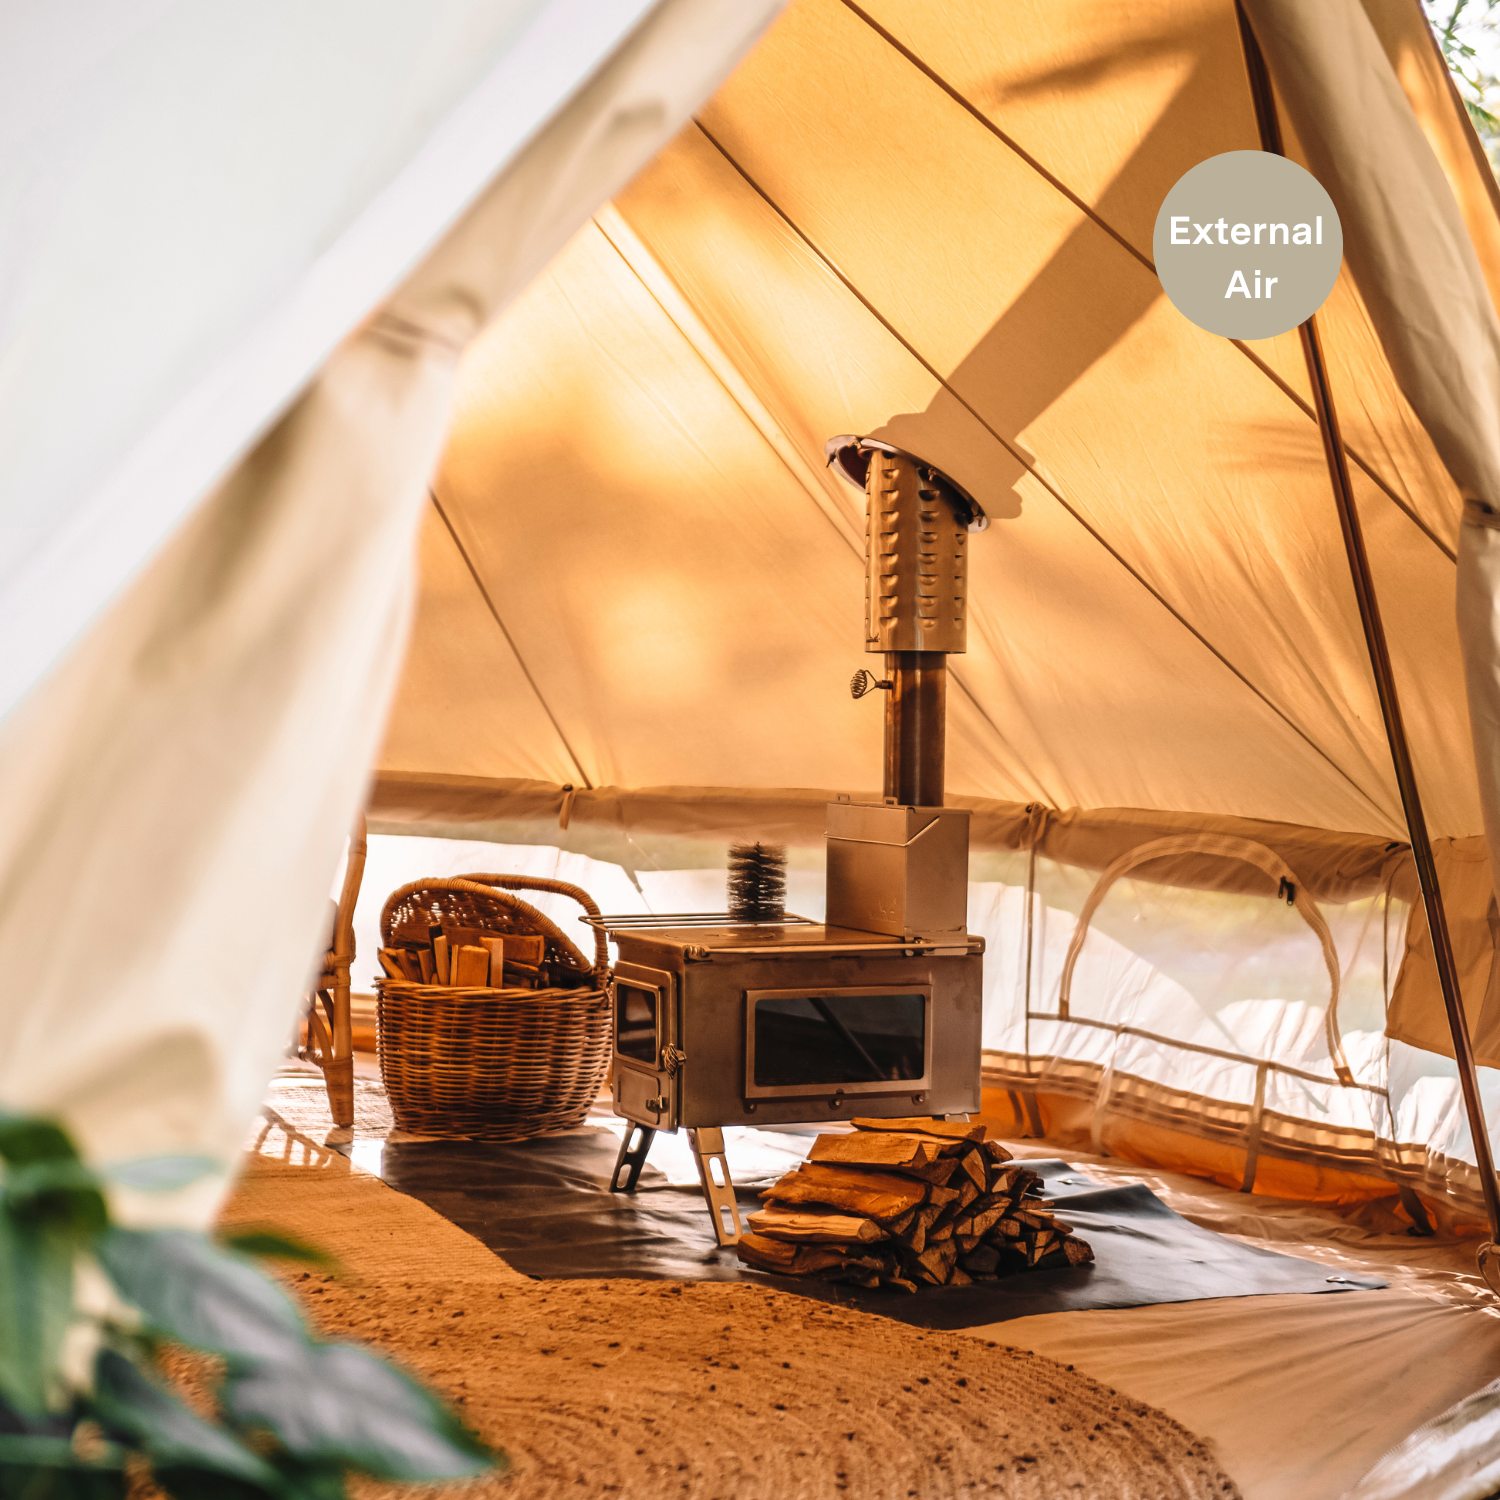 Image of SAVE $380 5m Classic Bell Tent + Nomad PLUS External Air Bundle